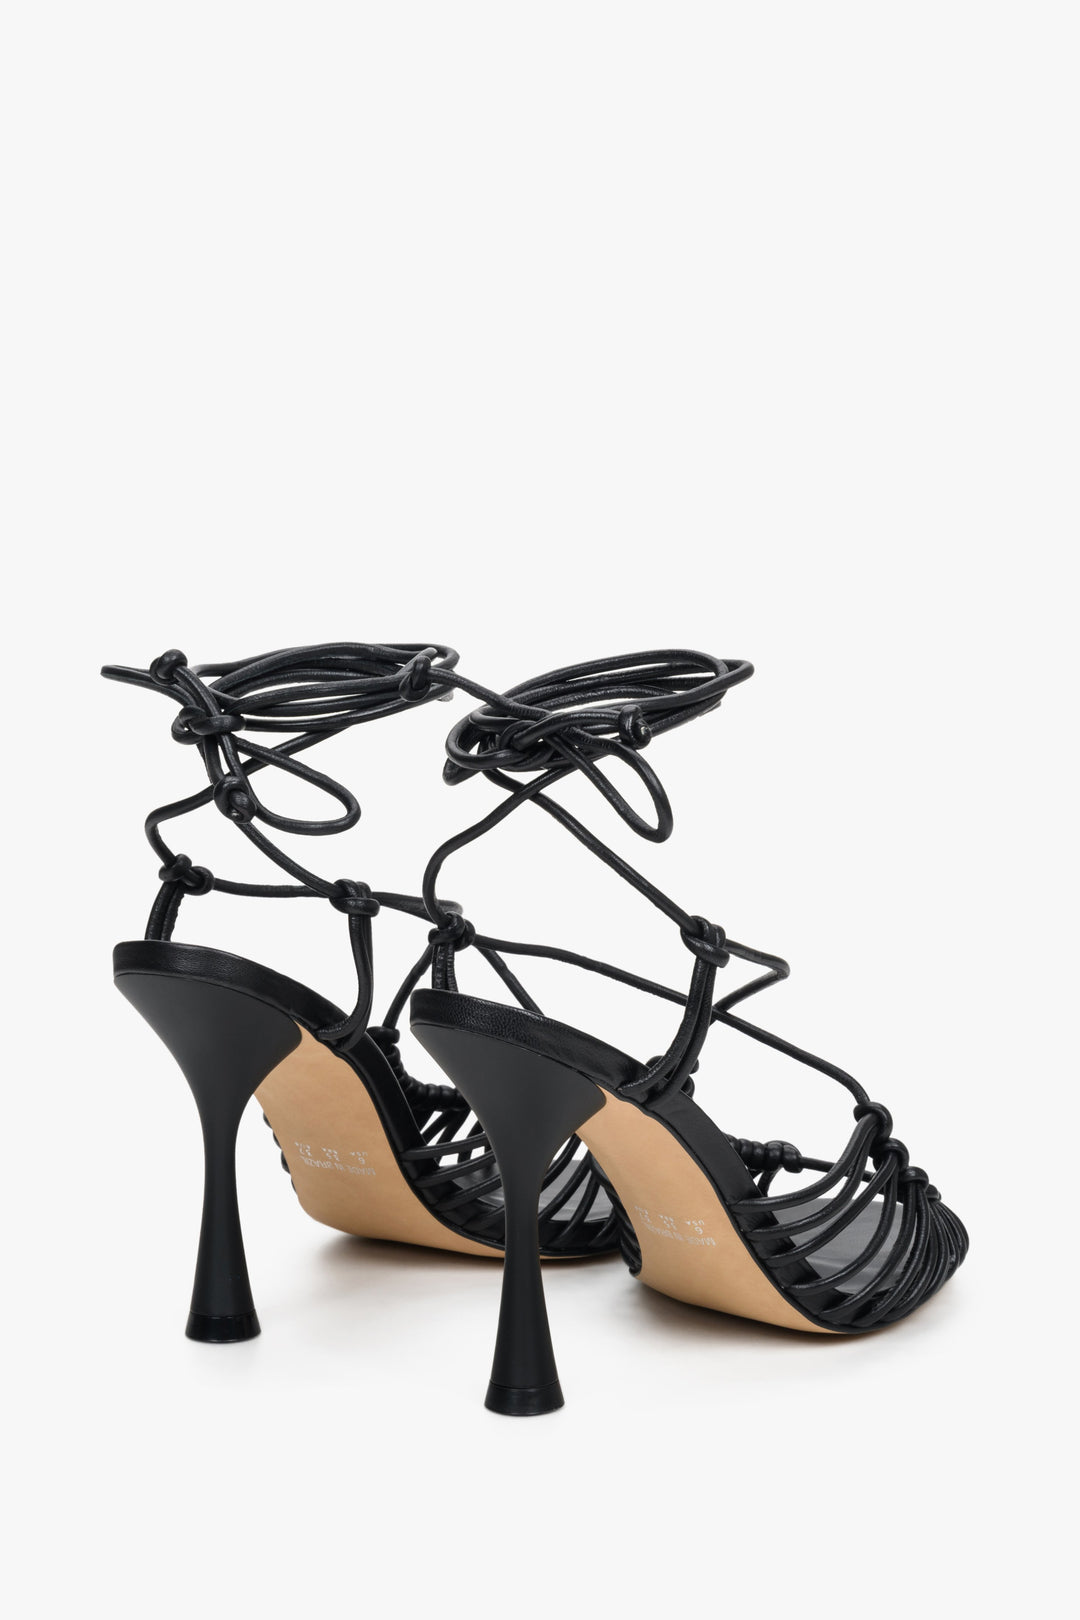 Women's black high heel sandals by Estro - close-up on the back of the shoe.